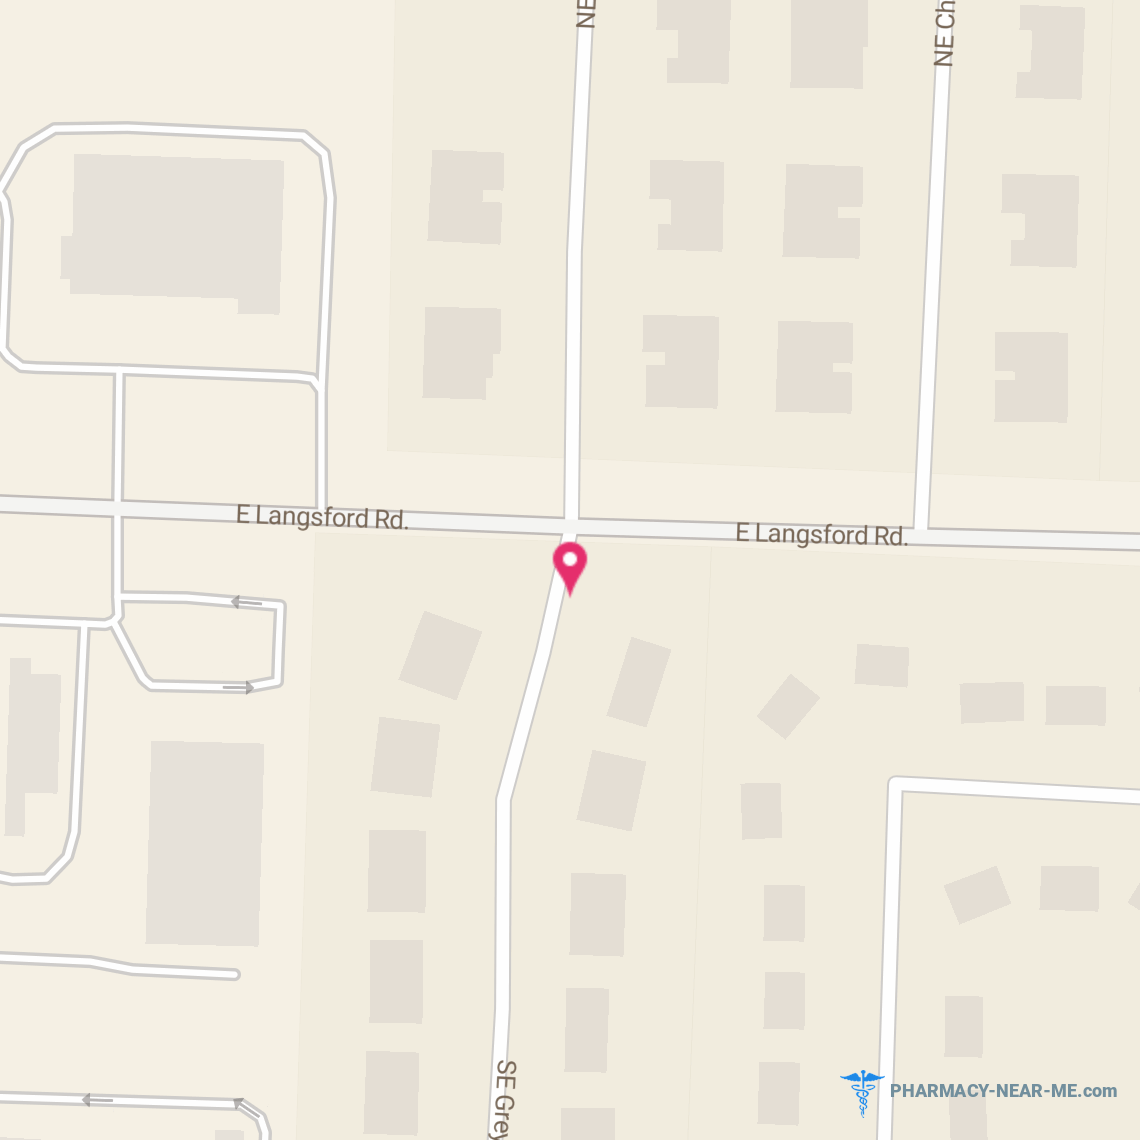 WALGREENS #04182 - Pharmacy Hours, Phone, Reviews & Information: 1801 E Langsford Rd, Lee's Summit, MO 64063